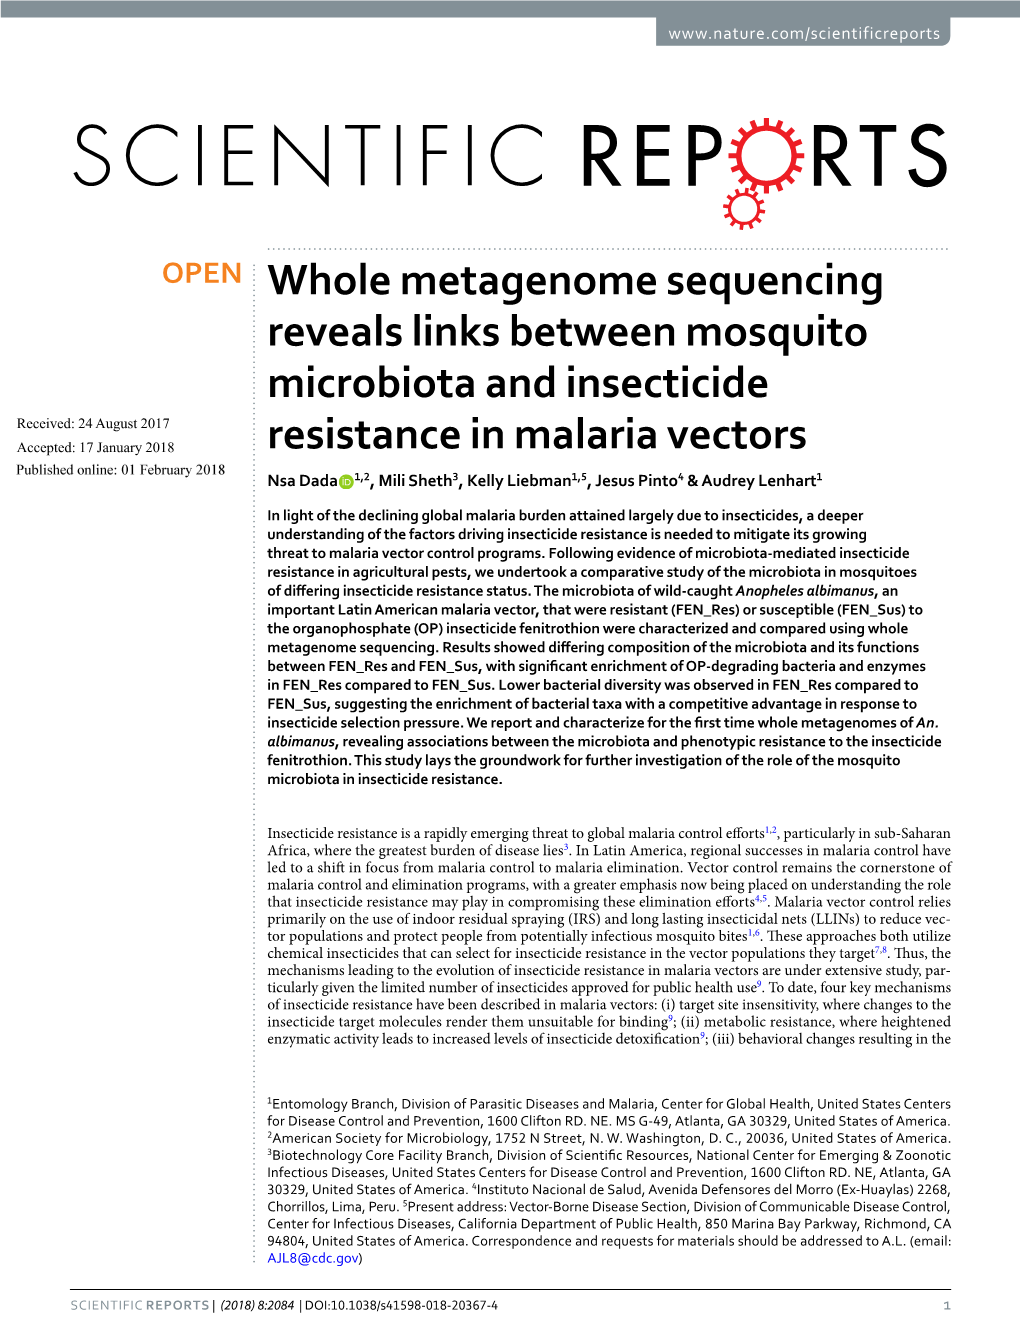 Whole Metagenome Sequencing Reveals Links Between Mosquito